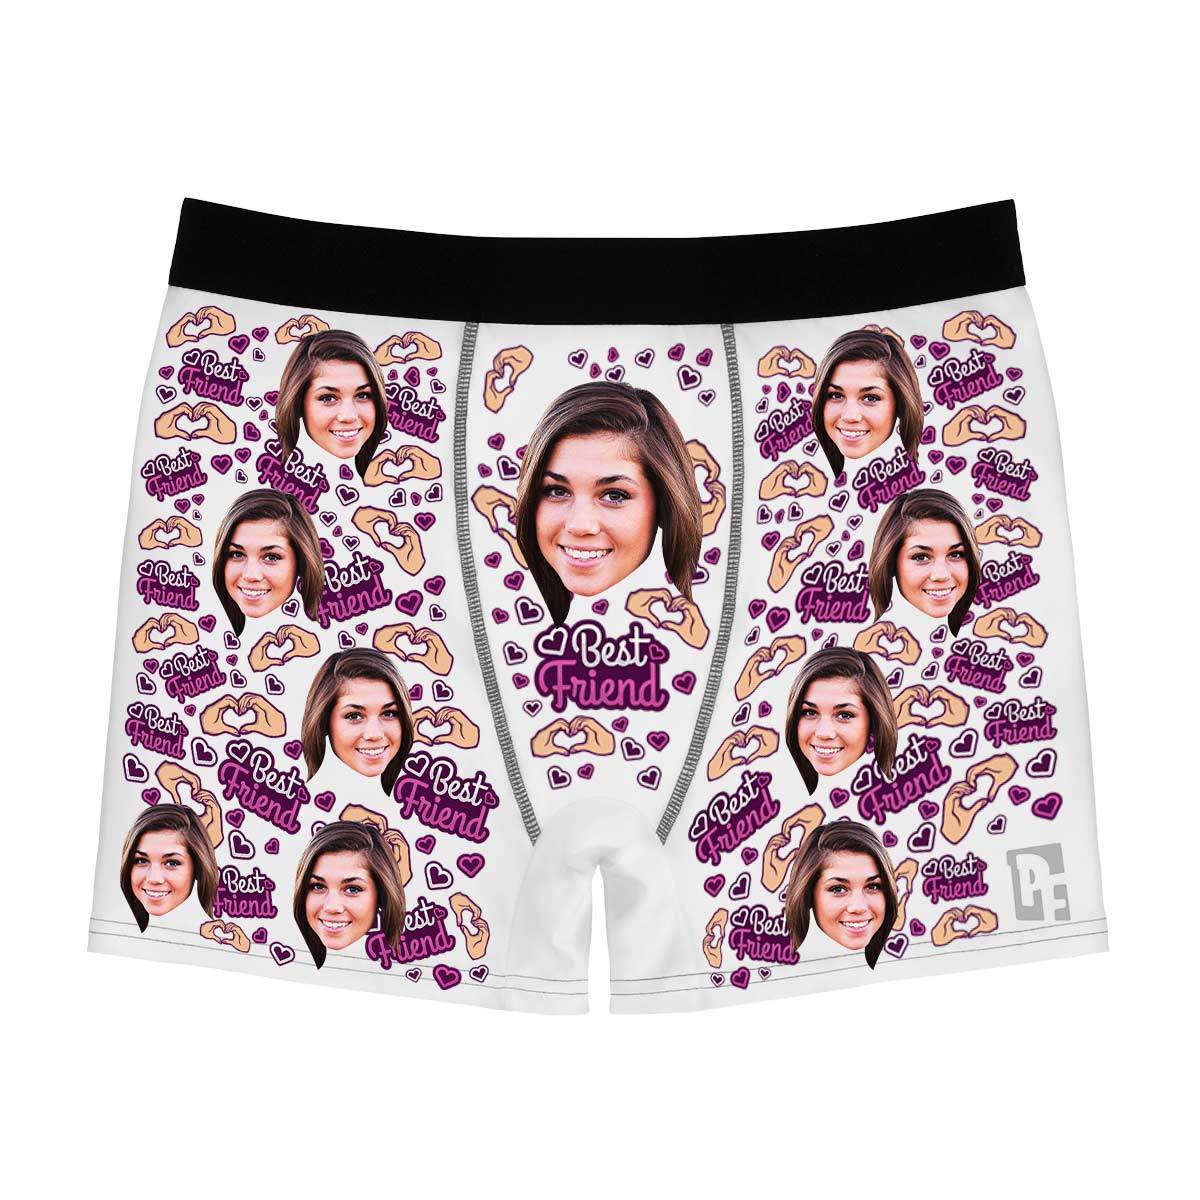 White BFF for her men's boxer briefs personalized with photo printed on them